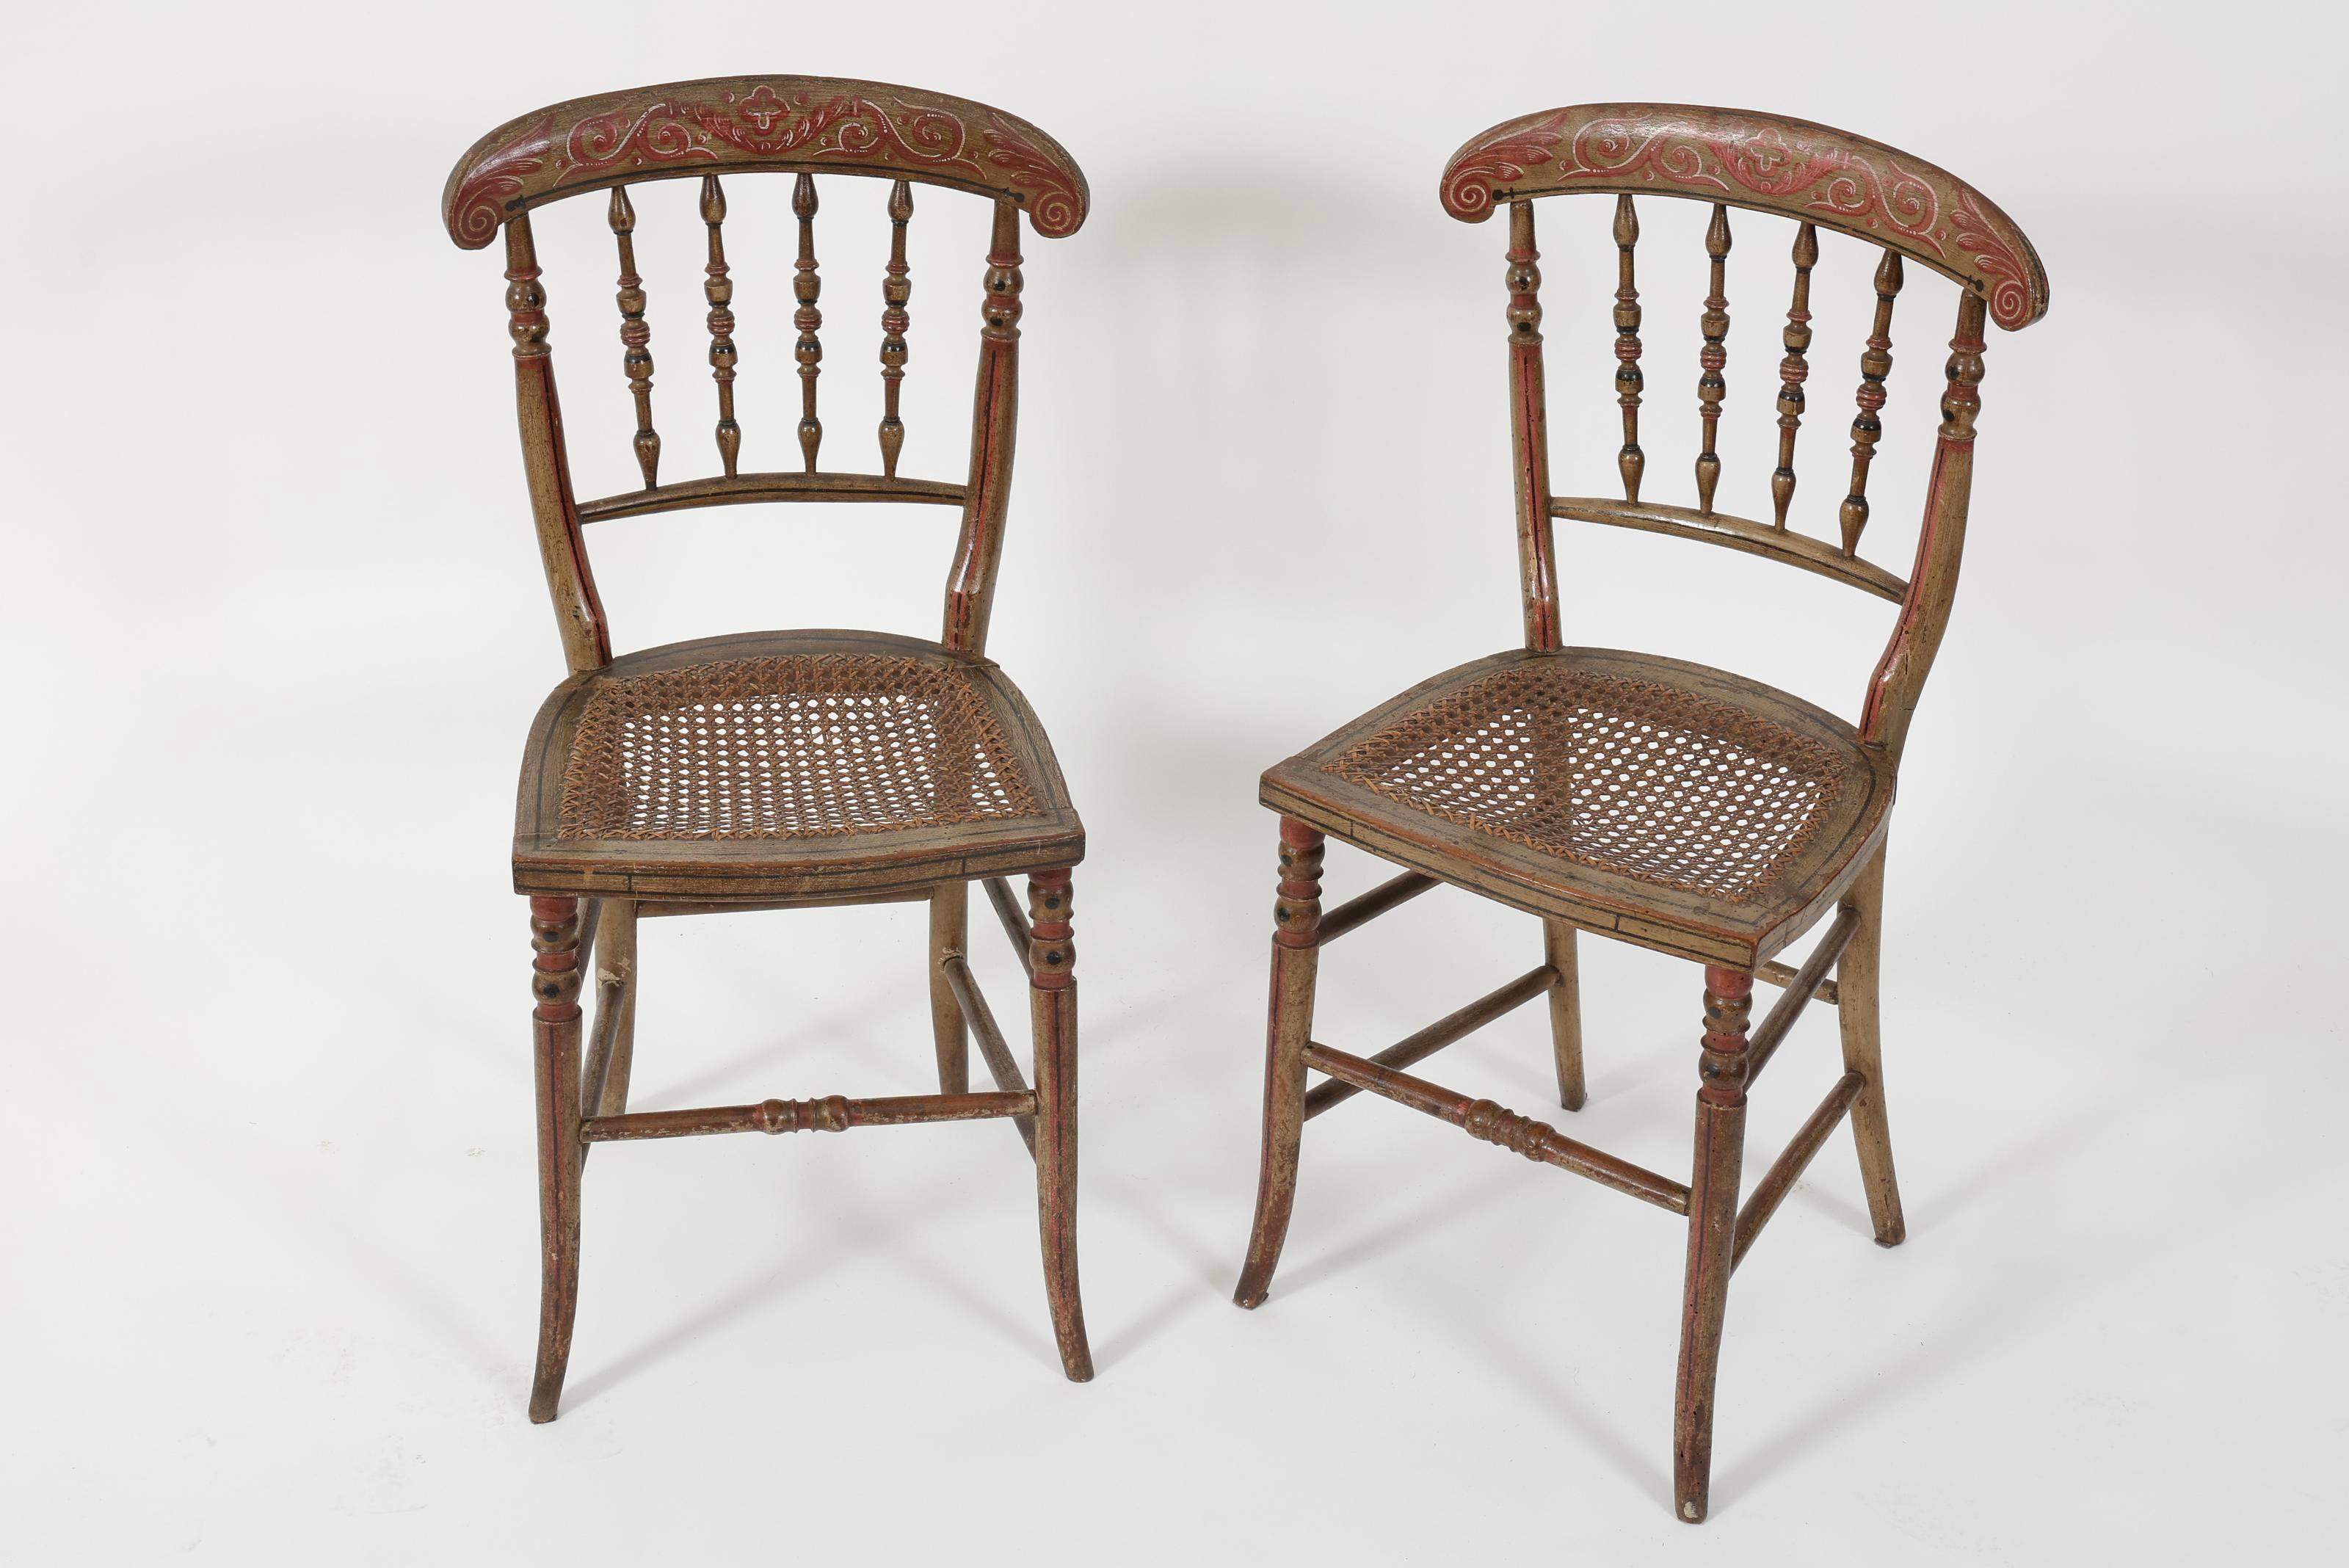 Mostly found to embelish and side furniture in hall ways and bedrooms, these painted wood work chairs of the XIX Century, besides offering excellent seat position, are in good condition to mosly being decorative items of the interior décor of the